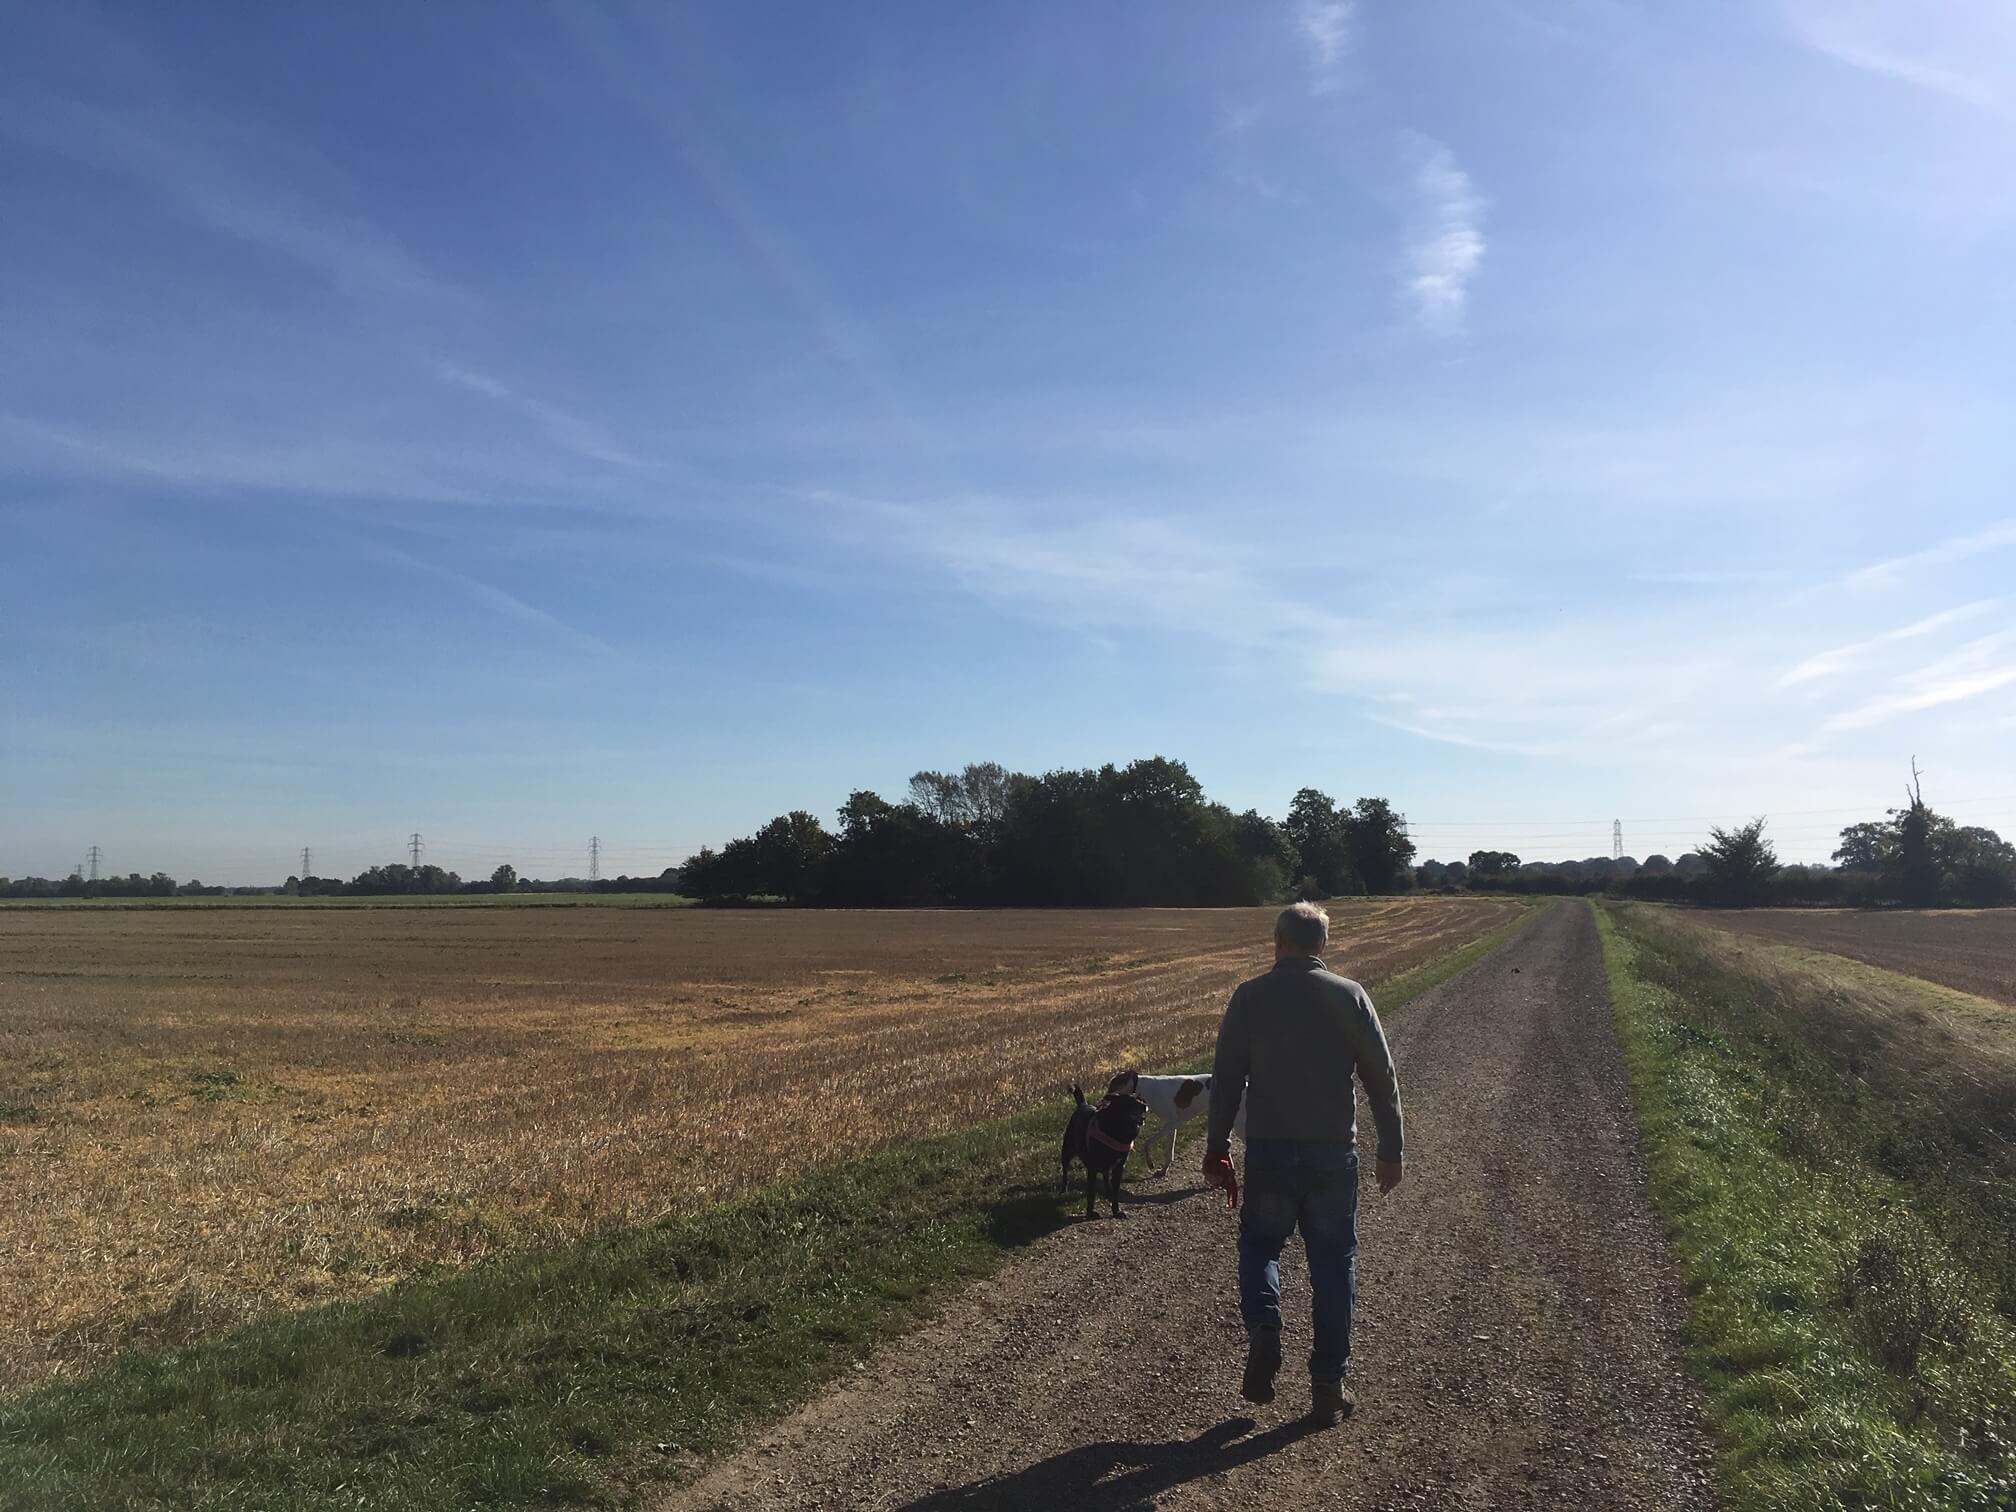 Slowing down – walking the dog